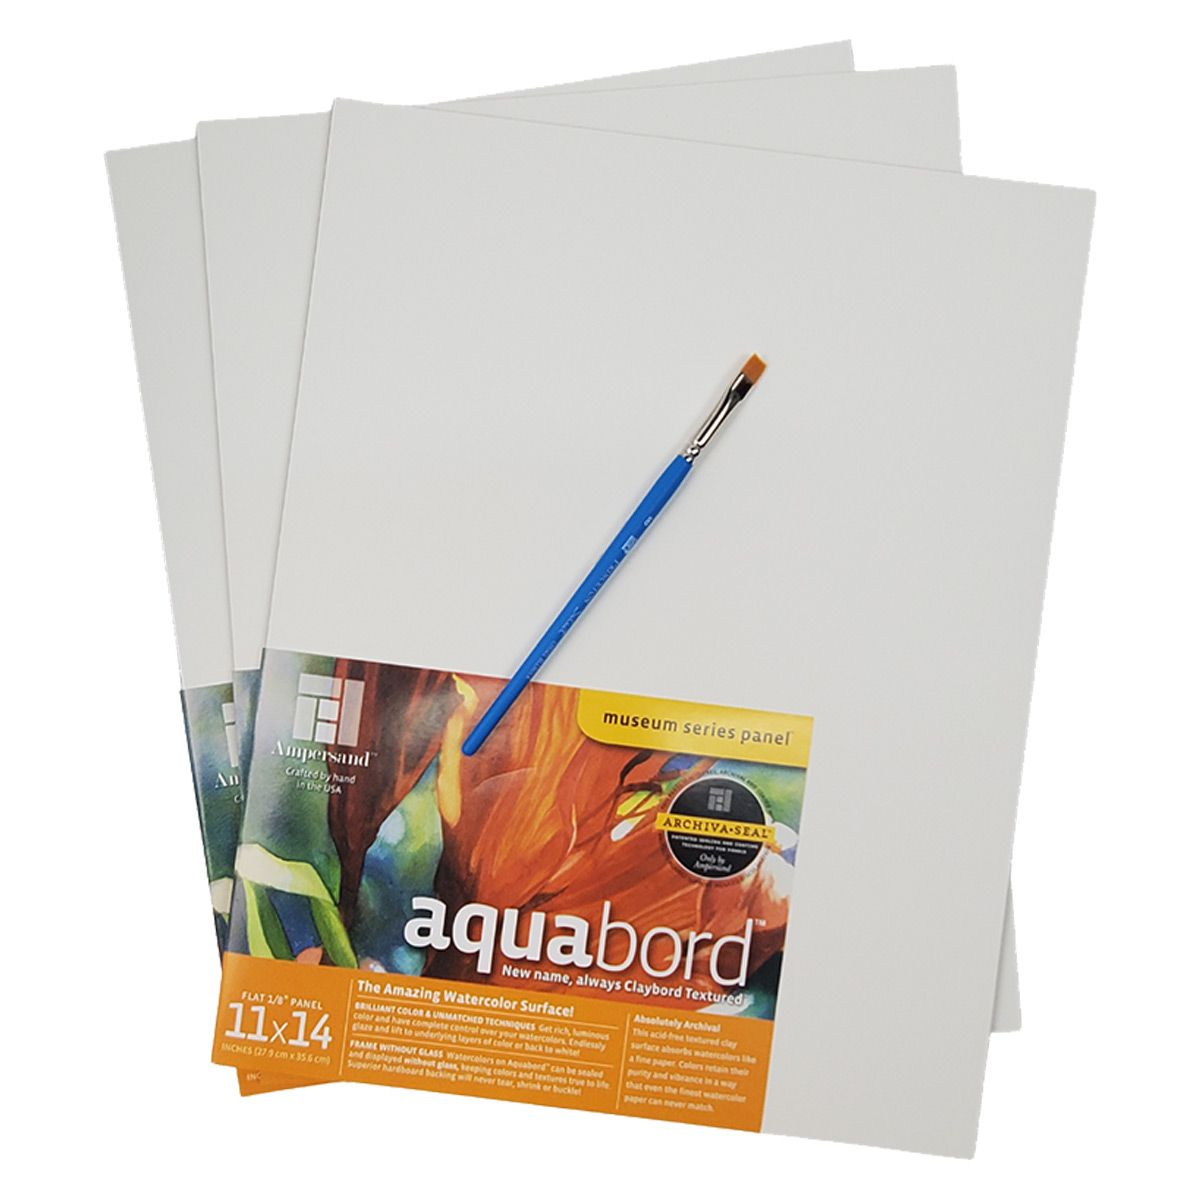 Each Ampersand Aquabord 11 in x 14 in 